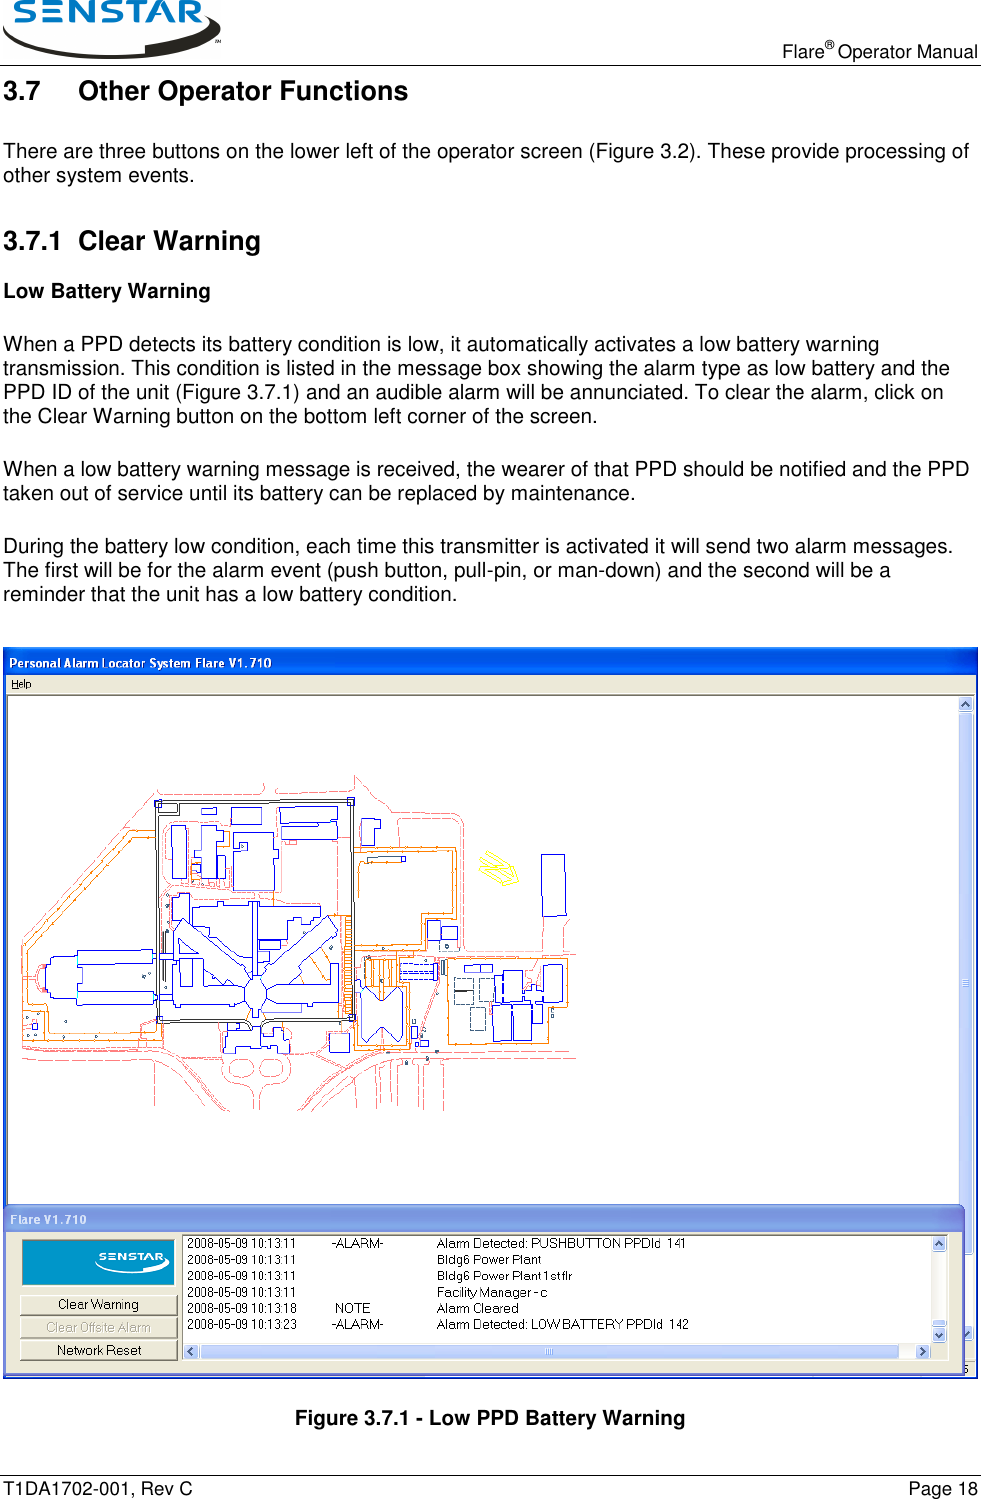   Flare® Operator Manual T1DA1702-001, Rev C    Page 18 3.7 Other Operator Functions There are three buttons on the lower left of the operator screen (Figure 3.2). These provide processing of other system events. 3.7.1  Clear Warning Low Battery Warning When a PPD detects its battery condition is low, it automatically activates a low battery warning transmission. This condition is listed in the message box showing the alarm type as low battery and the PPD ID of the unit (Figure 3.7.1) and an audible alarm will be annunciated. To clear the alarm, click on the Clear Warning button on the bottom left corner of the screen. When a low battery warning message is received, the wearer of that PPD should be notified and the PPD taken out of service until its battery can be replaced by maintenance. During the battery low condition, each time this transmitter is activated it will send two alarm messages. The first will be for the alarm event (push button, pull-pin, or man-down) and the second will be a reminder that the unit has a low battery condition.     Figure 3.7.1 - Low PPD Battery Warning 